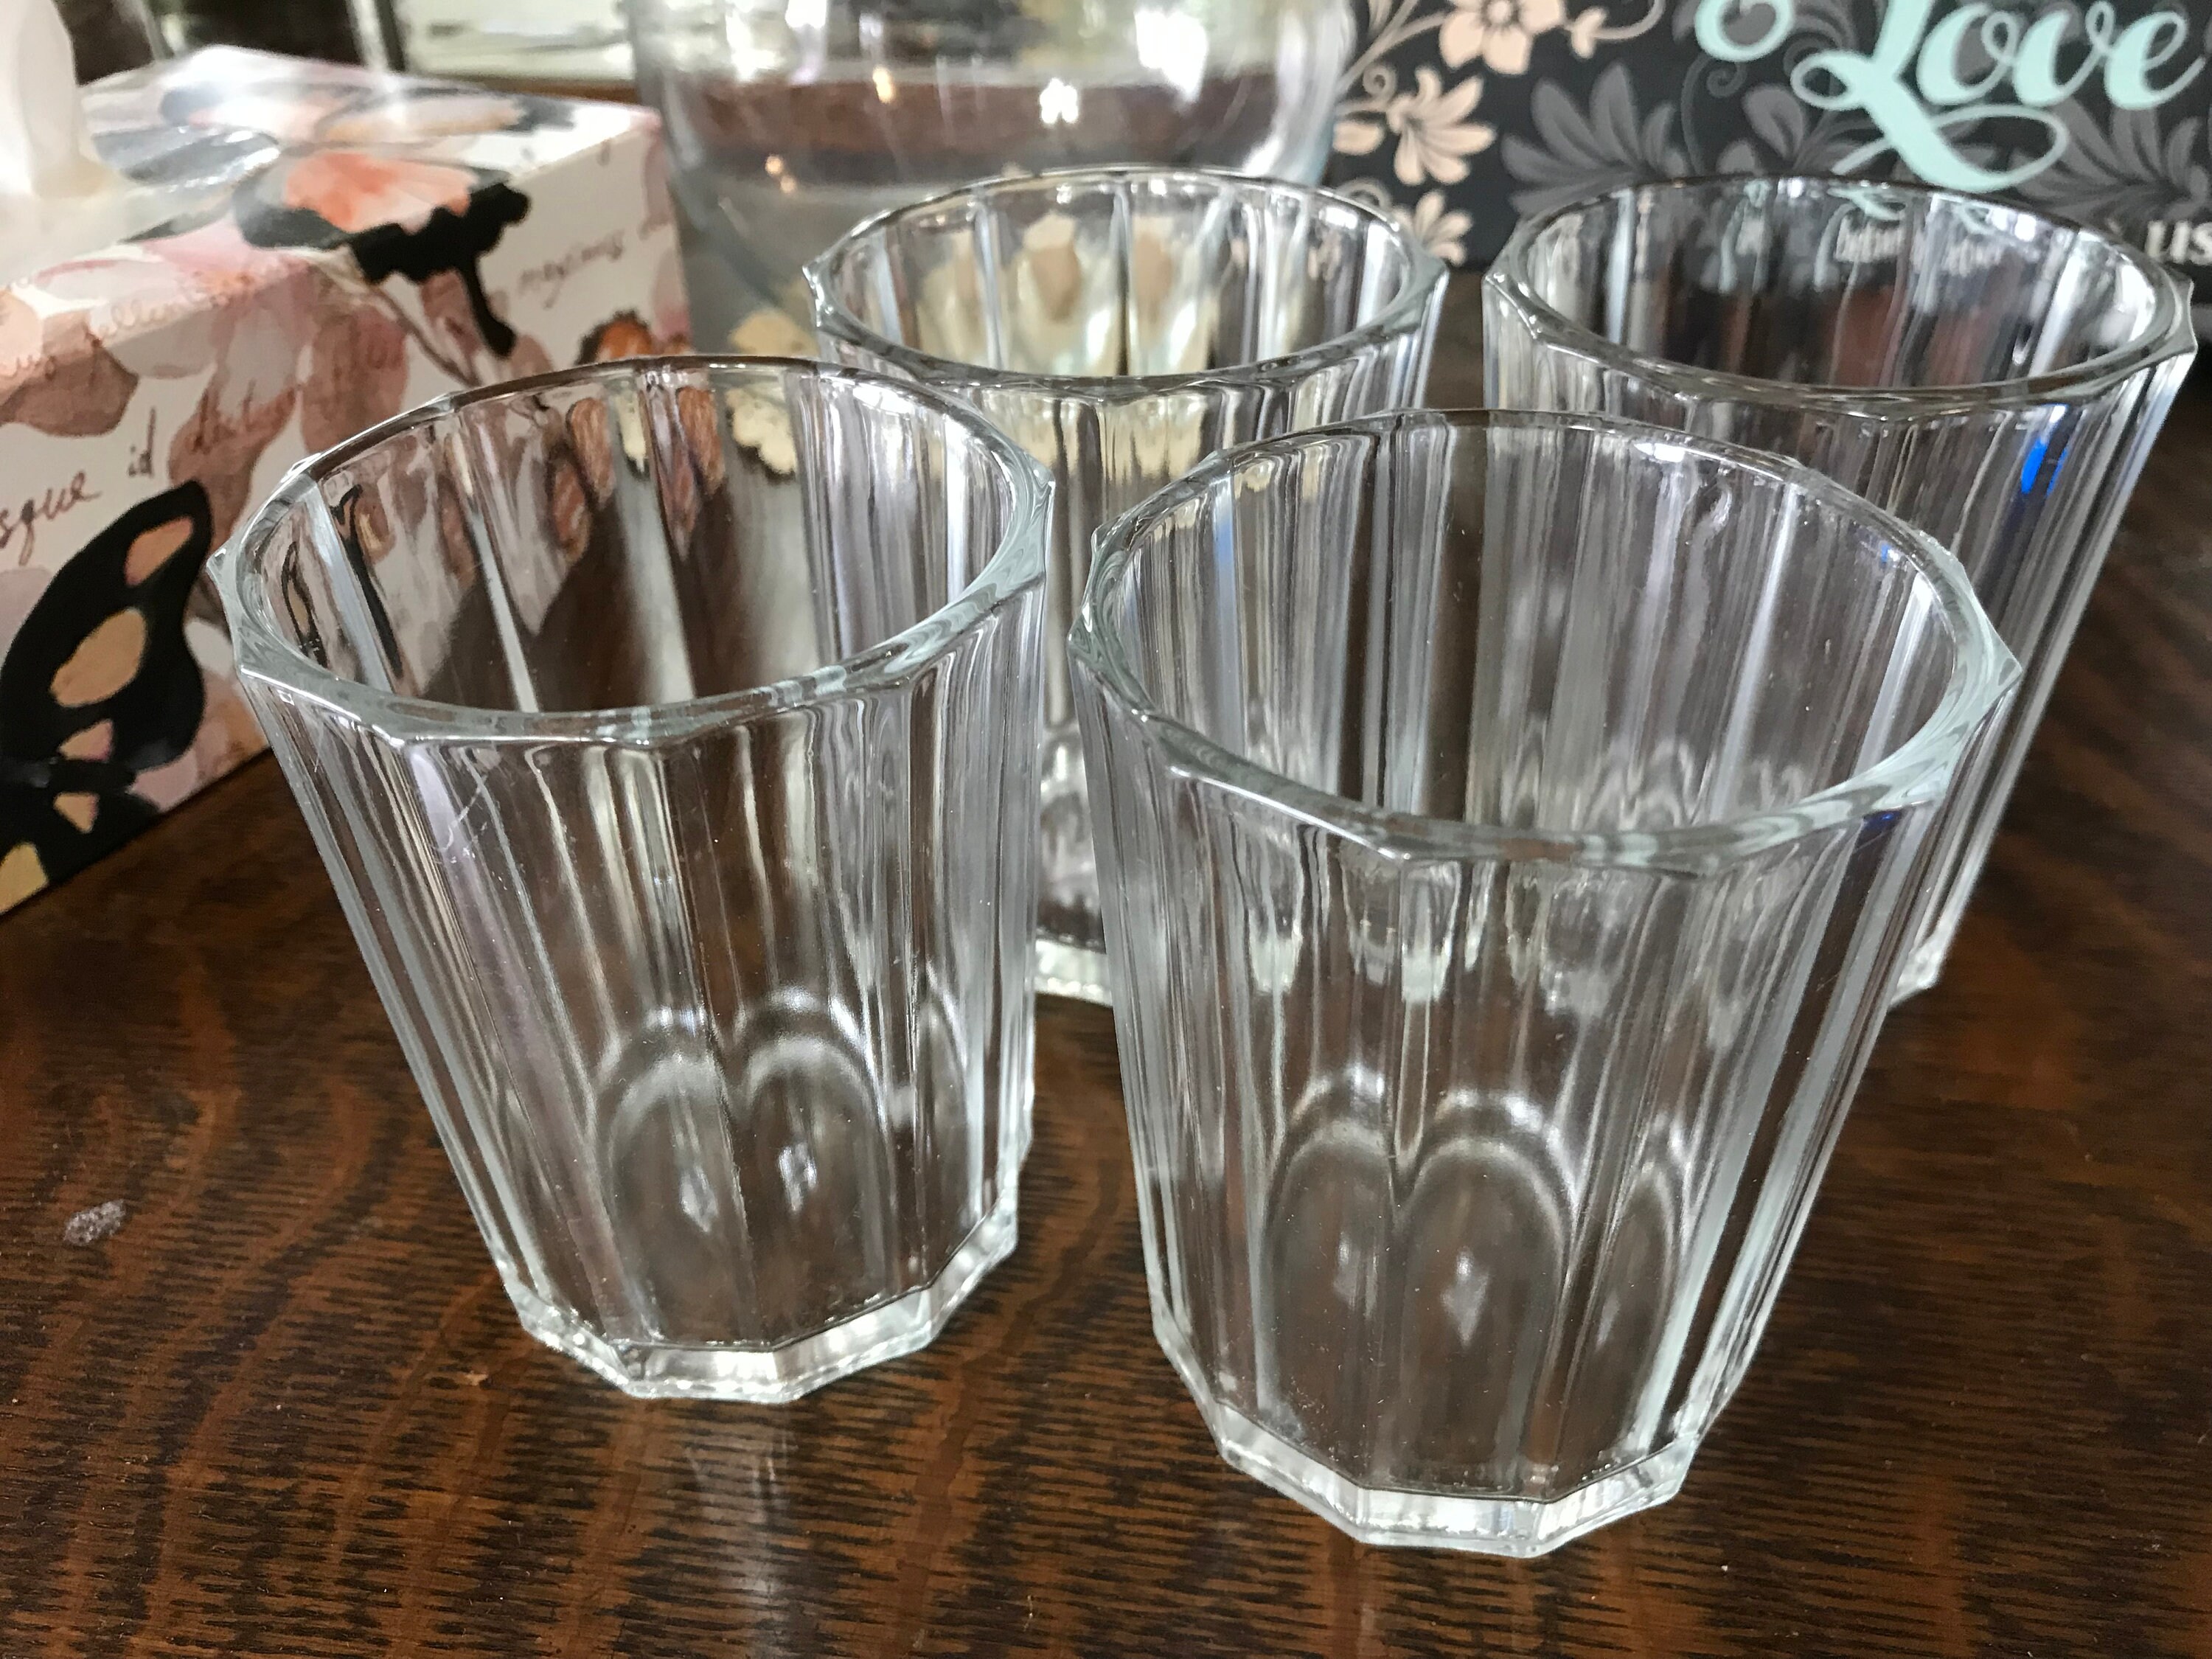 wookgreat Vintage Drinking Glasses Set of 12, Textured Clear Striped Glass  Cups, Ribbed Glassware Se…See more wookgreat Vintage Drinking Glasses Set